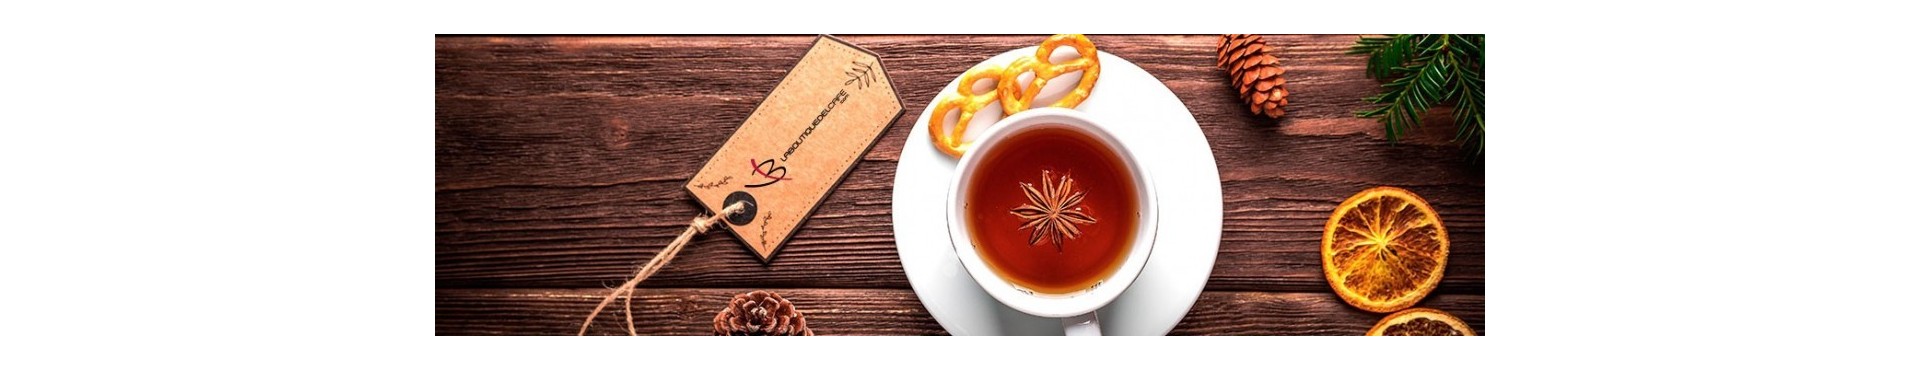 Rooibos e infusiones